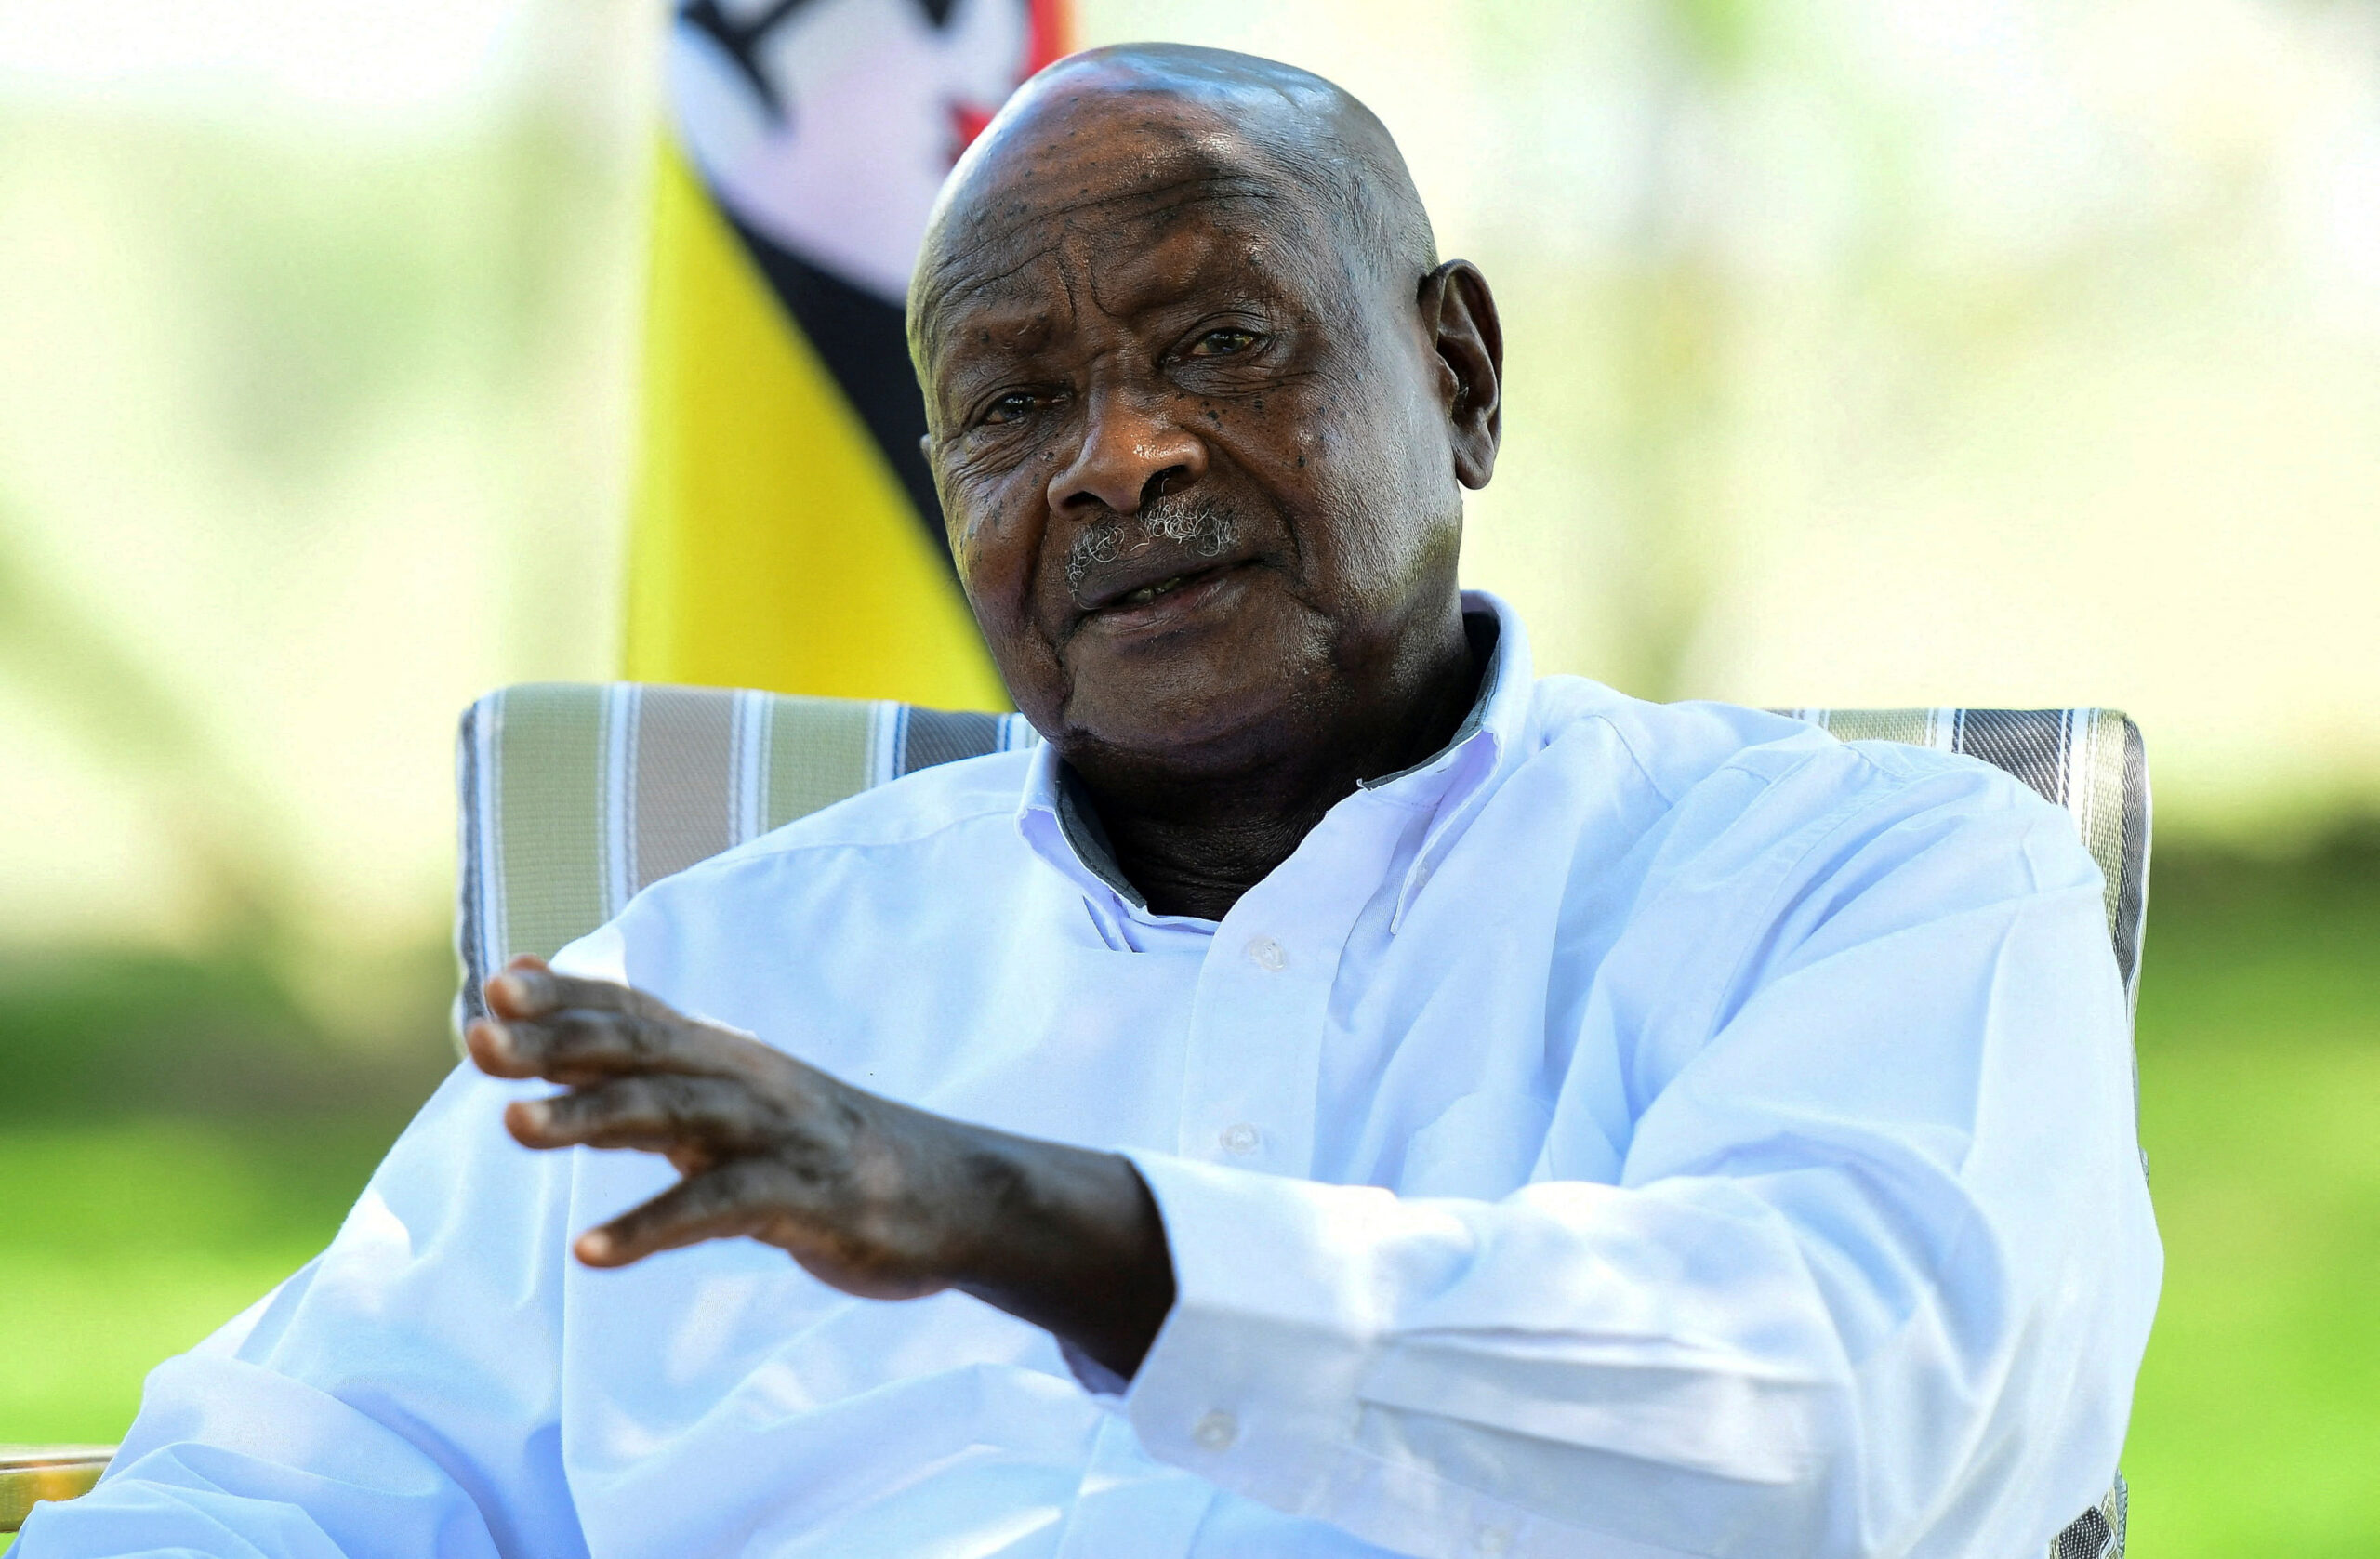 You are currently viewing Yoweri Museveni, the aging president of Uganda, is supported by the memory of his former valor.